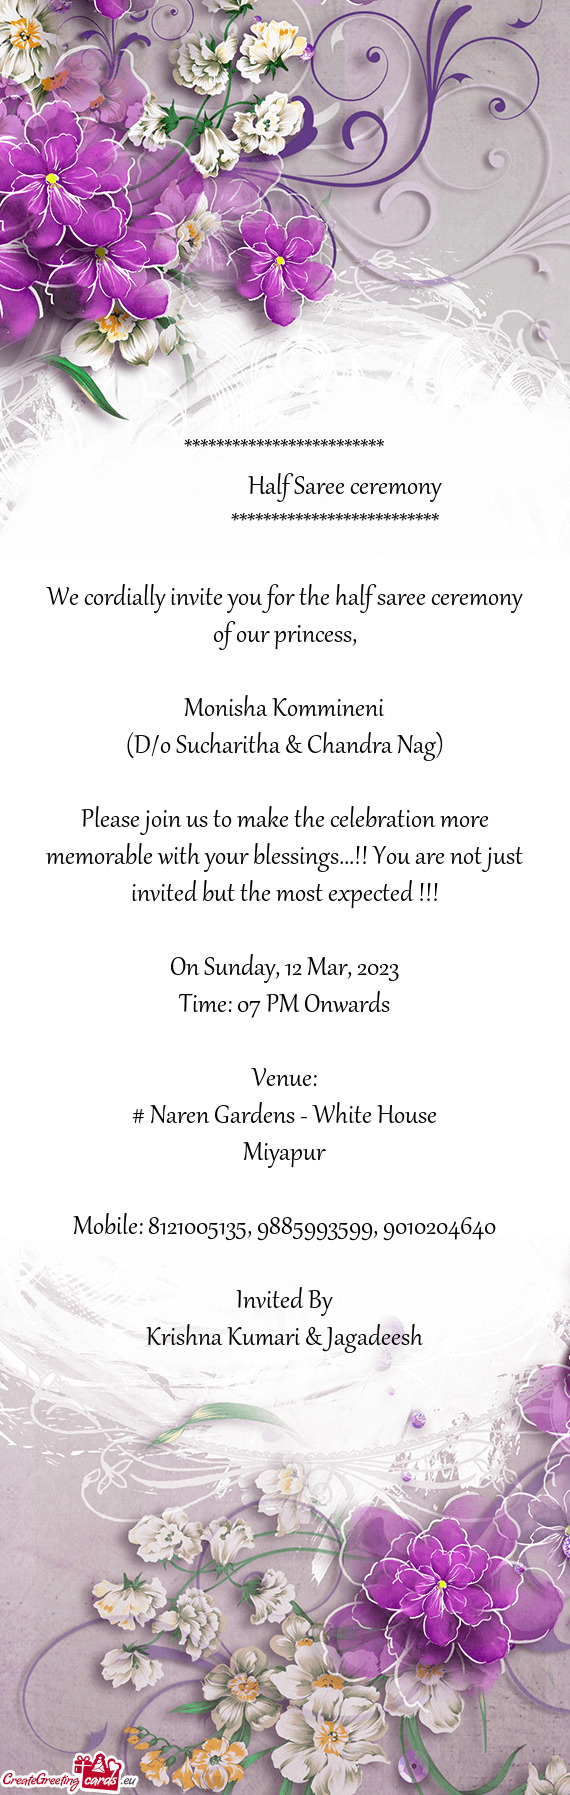 We cordially invite you for the half saree ceremony of our princess